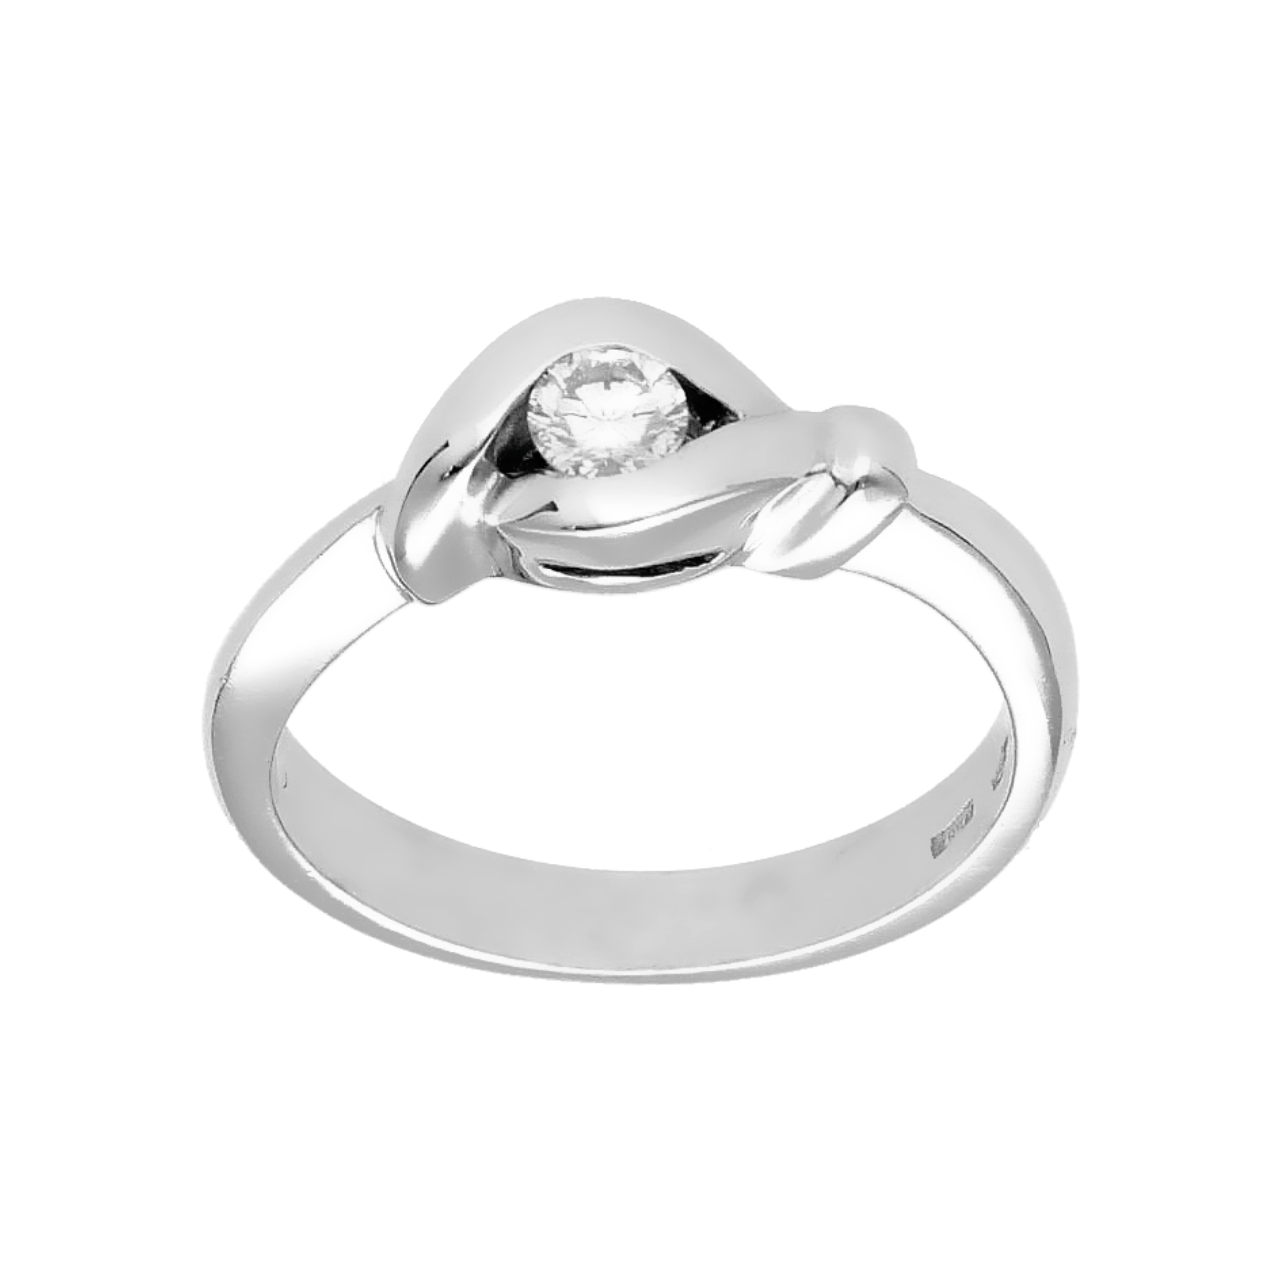 White gold ring with 0.18 ct diamond.